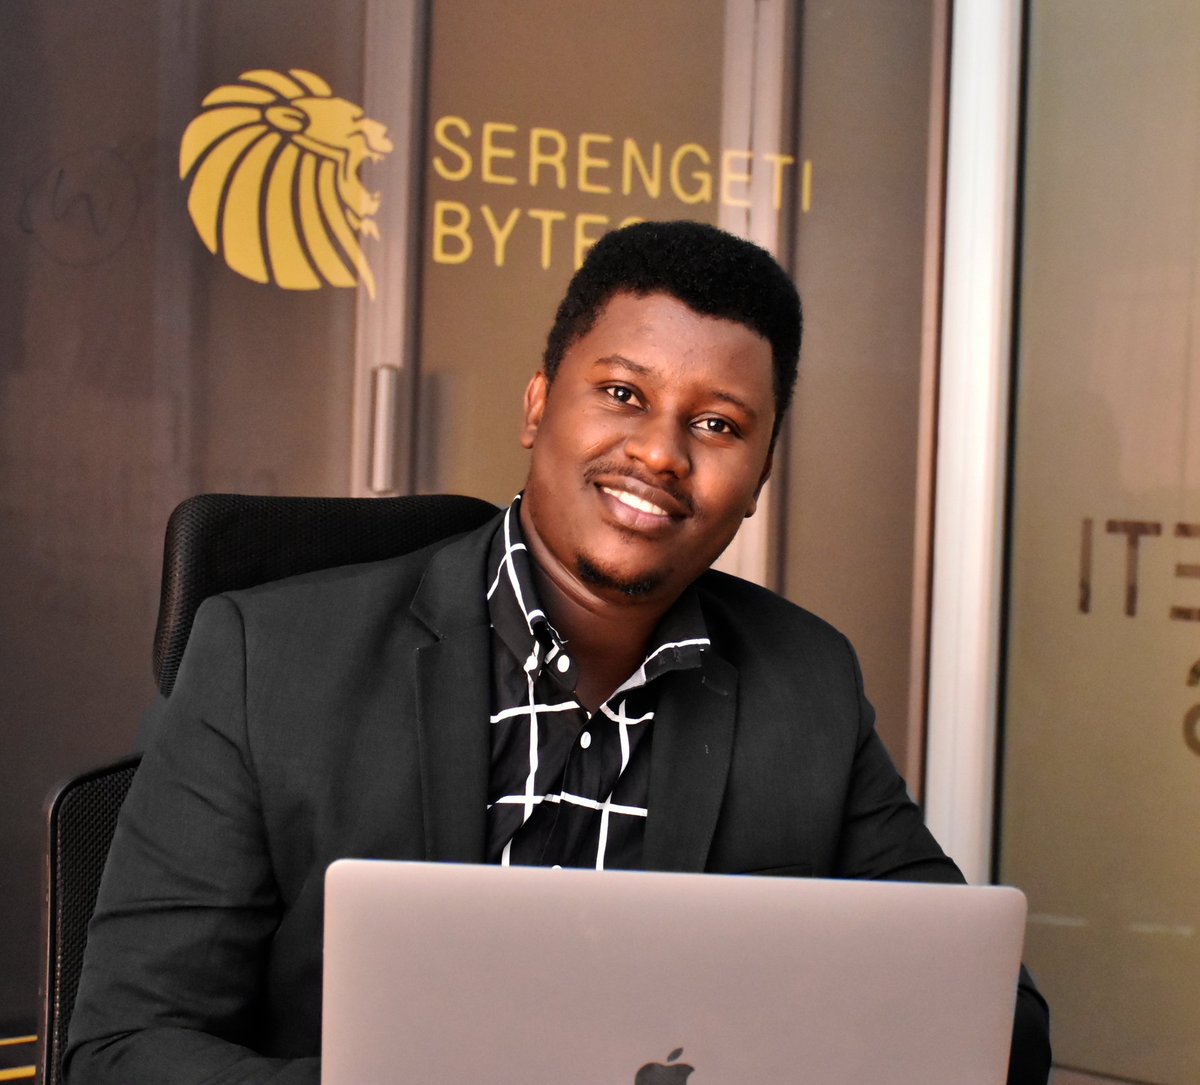 In September 2019, Clutch, a US based research, ratings and reviews site listed  @SerengetiBytes (his company) as one of the 2019 Top 20 B2B companies in Africa.  #InspireMeToInspireOthers  #WeKeepMoving